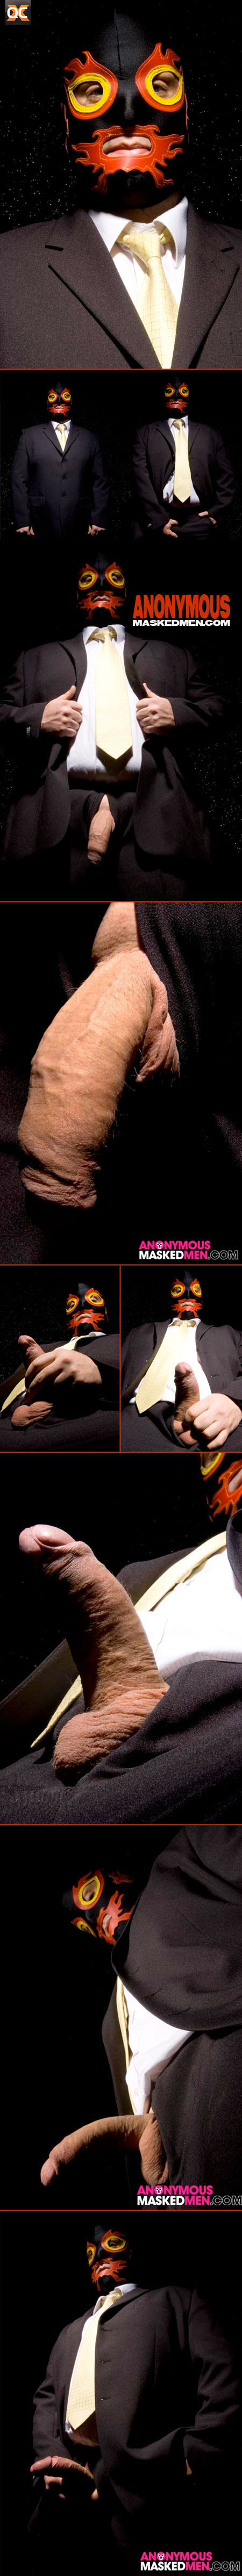 anonymous masked men suited stranger